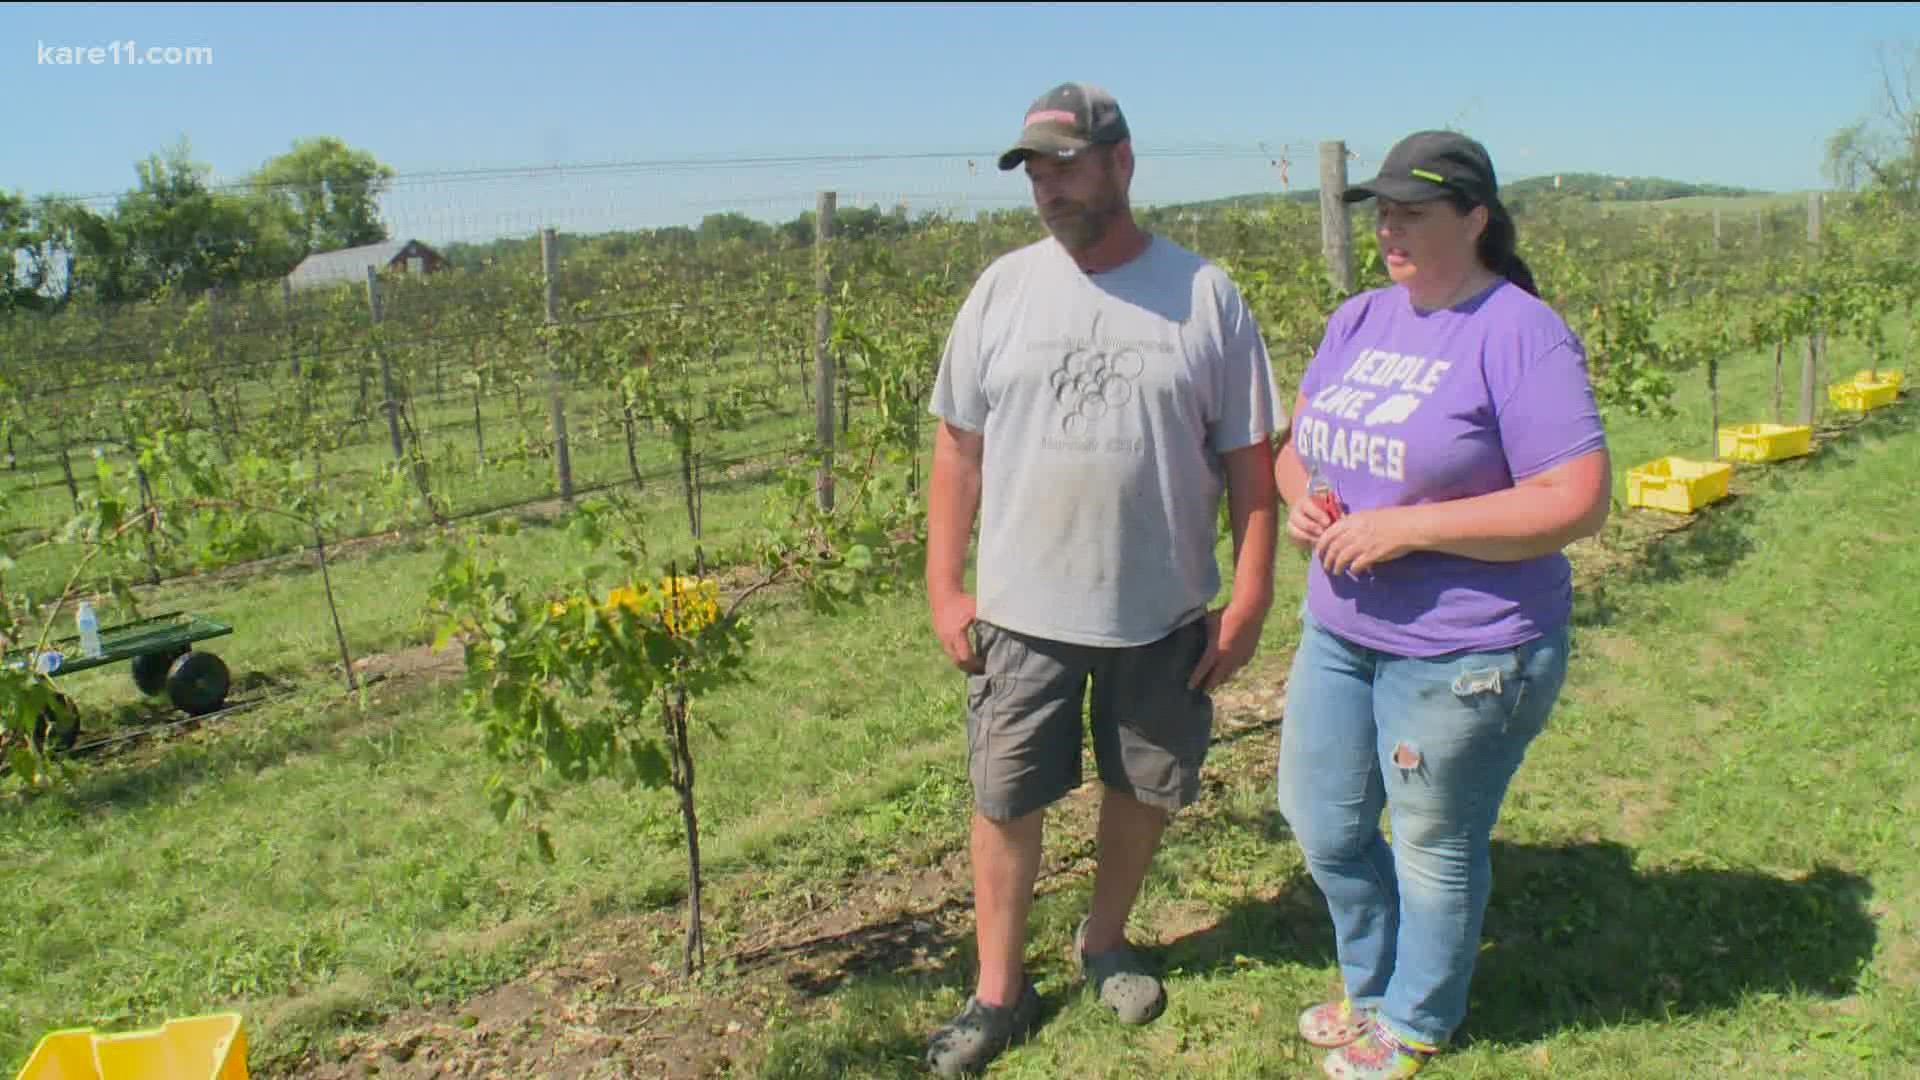 “All the fruit you see on the ground is from the storm, the leaves are shredded from hail damage and the fruit are busted open, it’s quite a loss,” said Chad Zirbes.